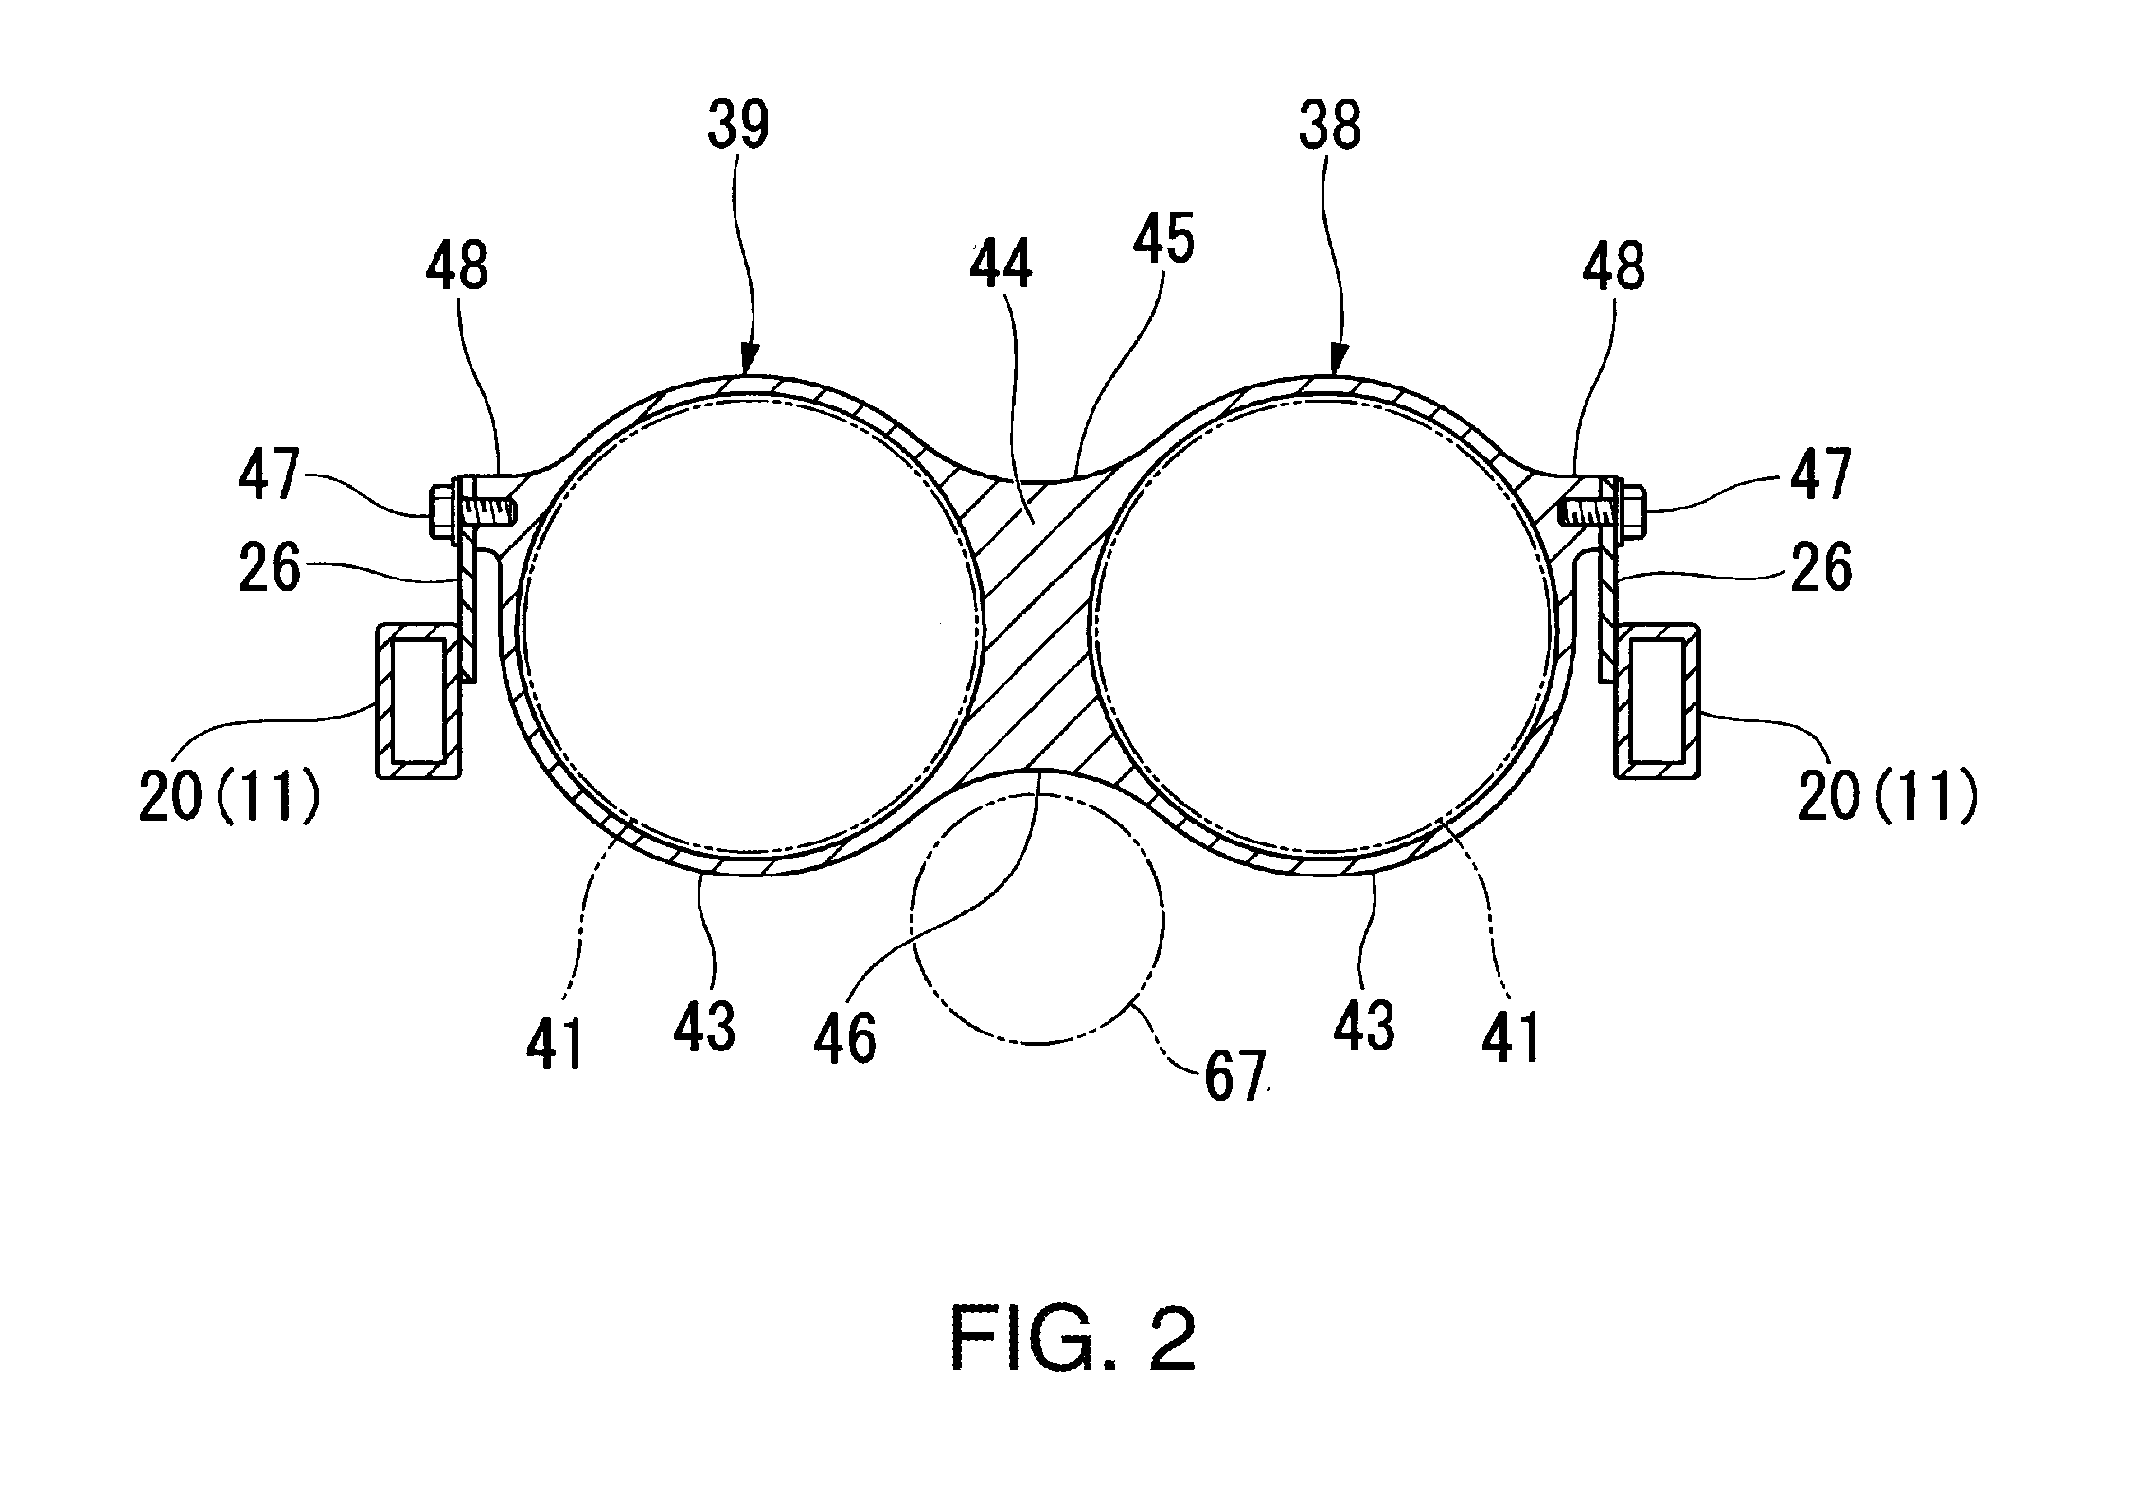 Electric vehicle having drivetrain and suspension